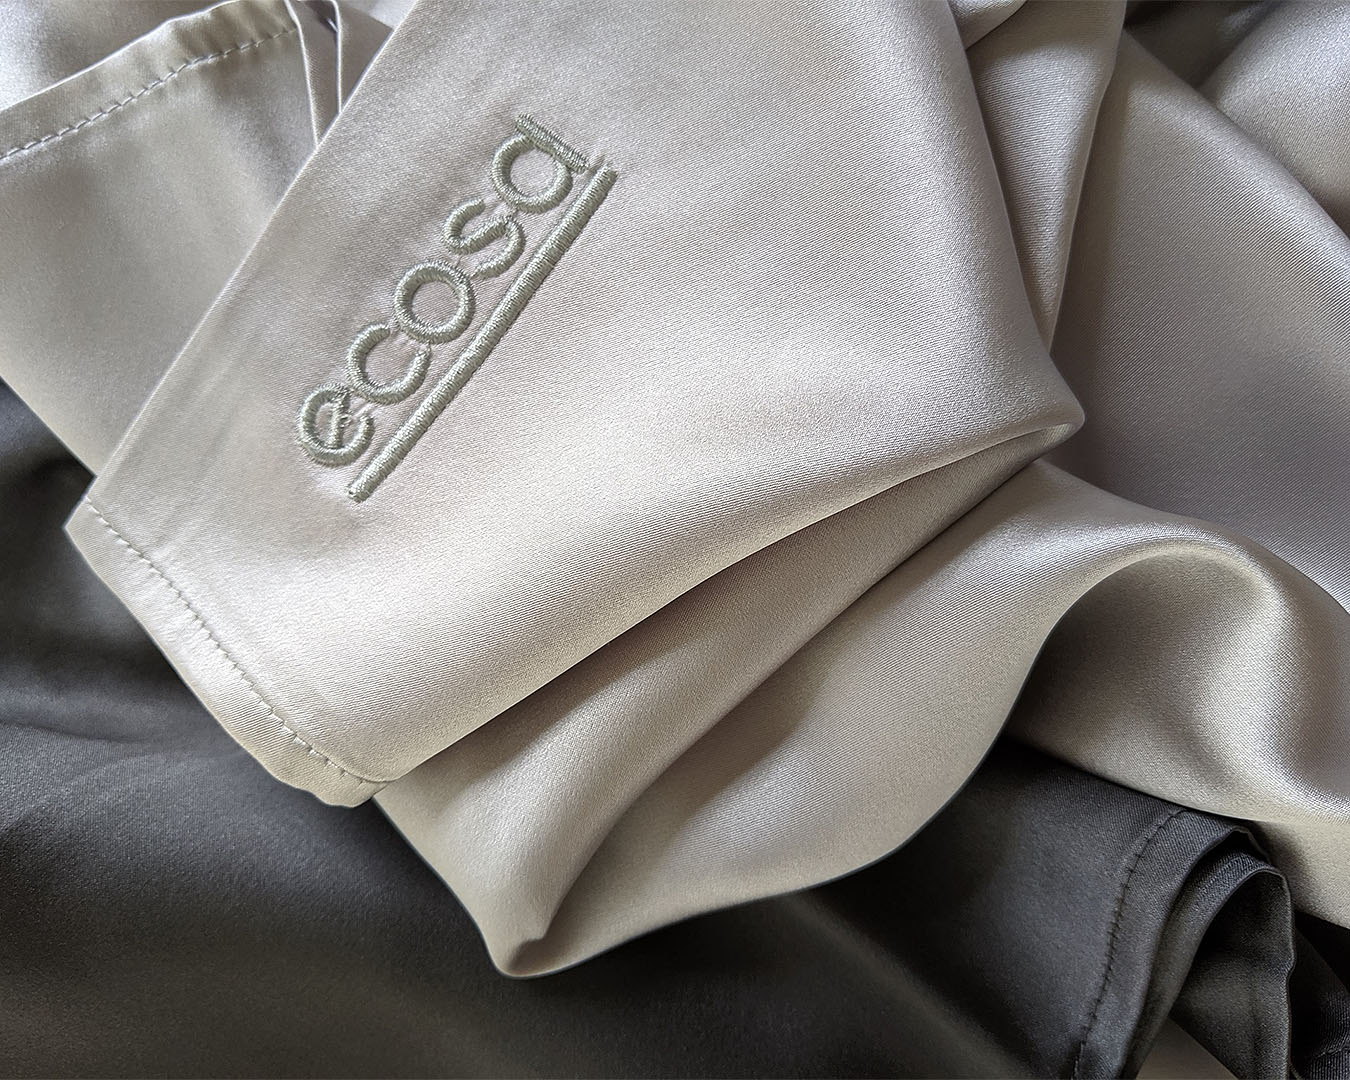 Silk pillowcases from Ecosa, one of the best silk pillowcases in NZ.